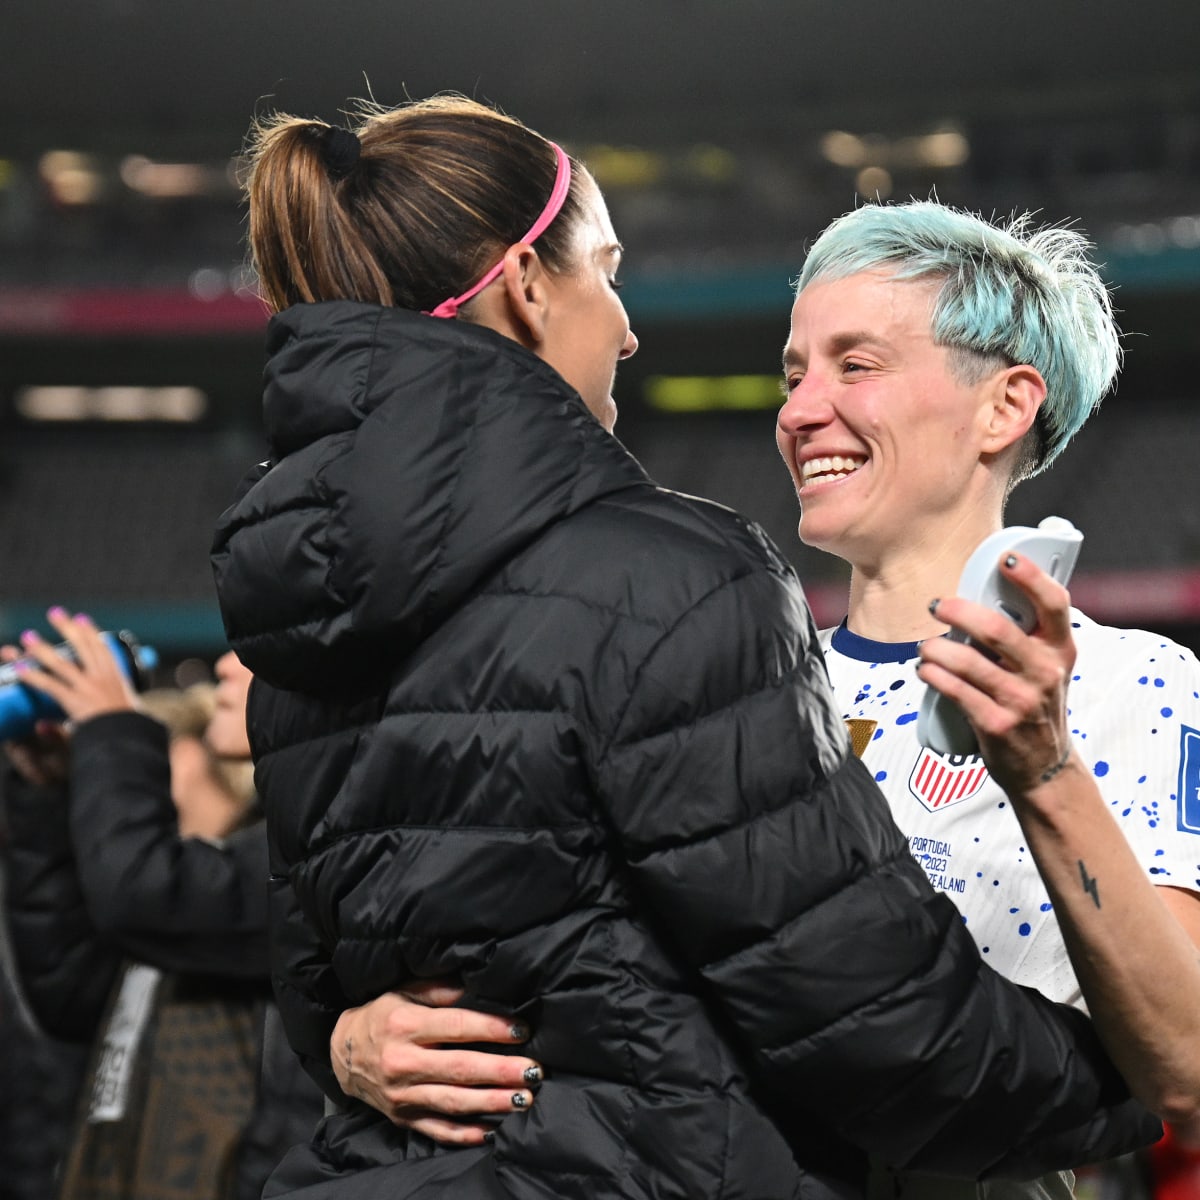 American icon Megan Rapinoe to play final game for USA in a friendly next  month